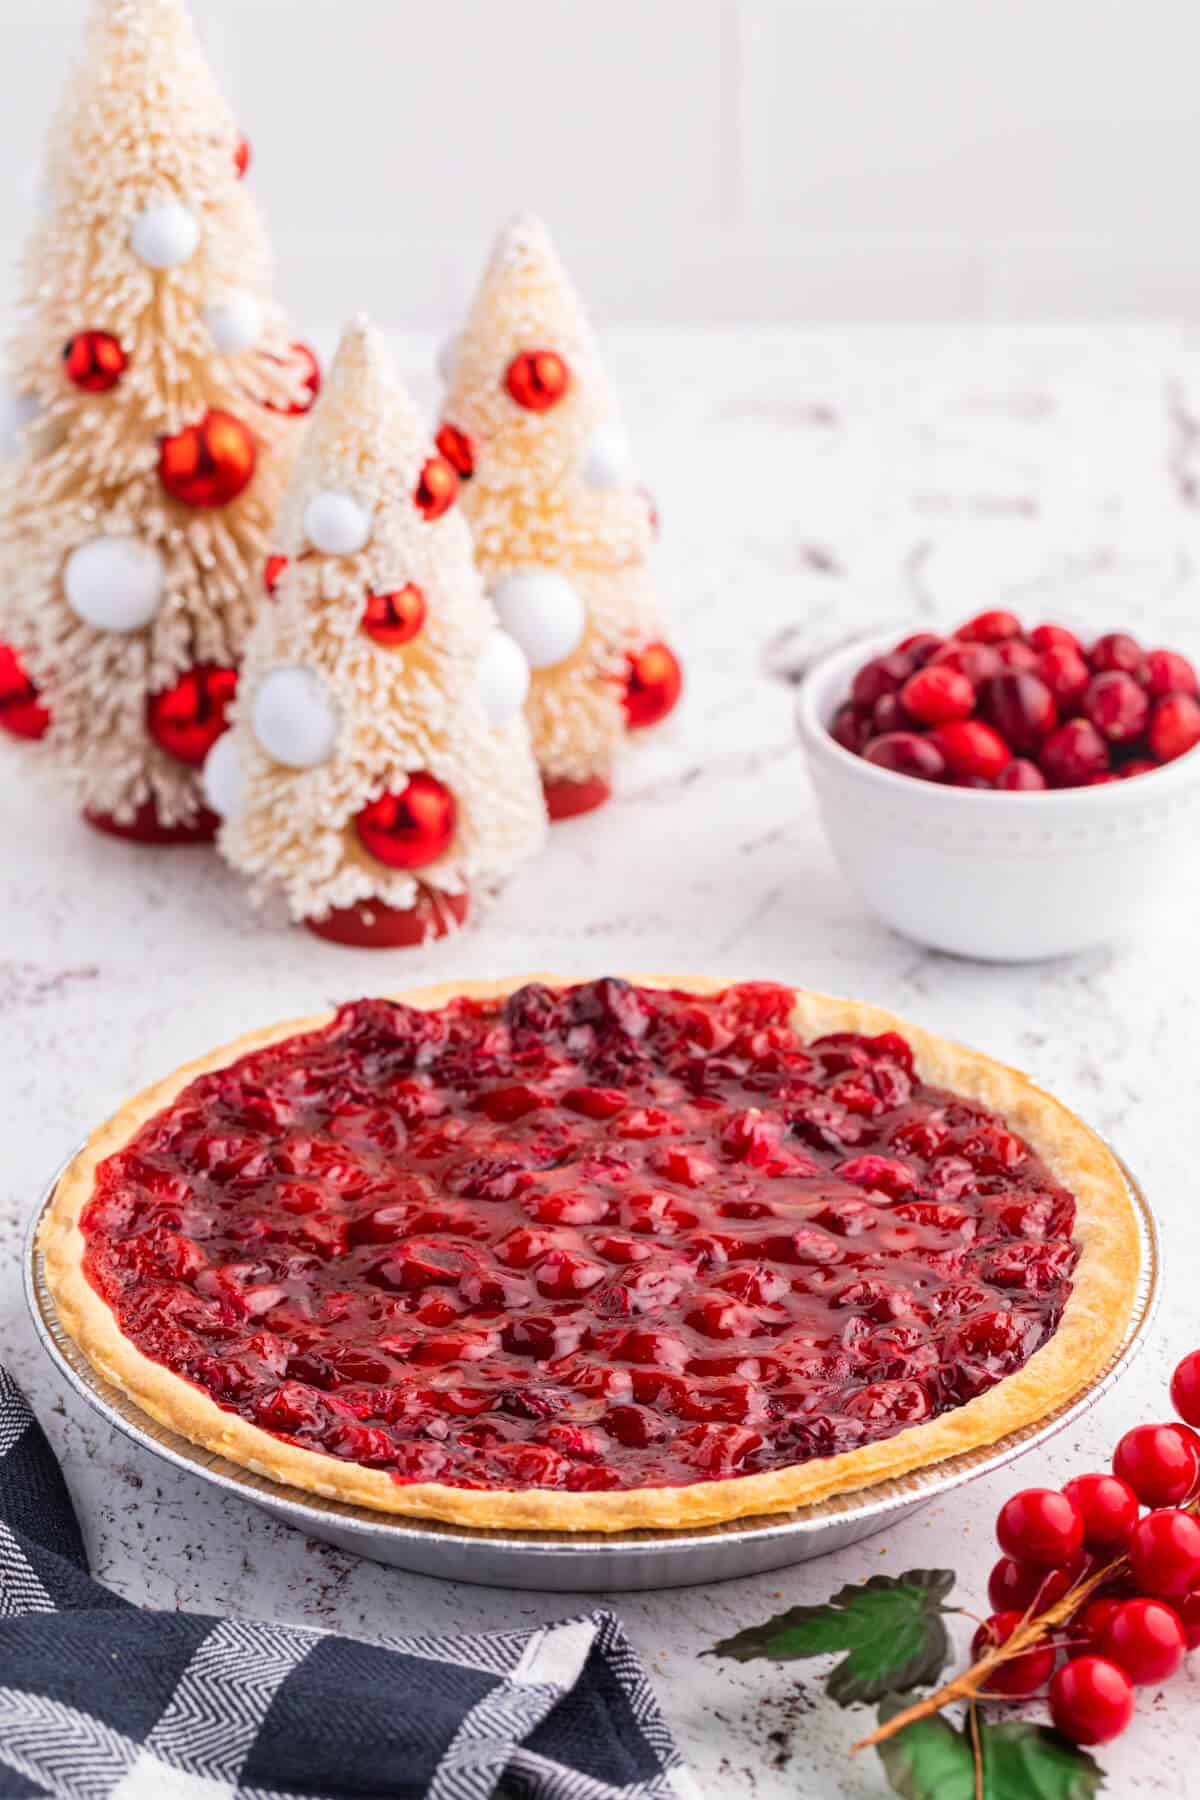 Cherry Cranberry Pie surrounded by Christmas decor.